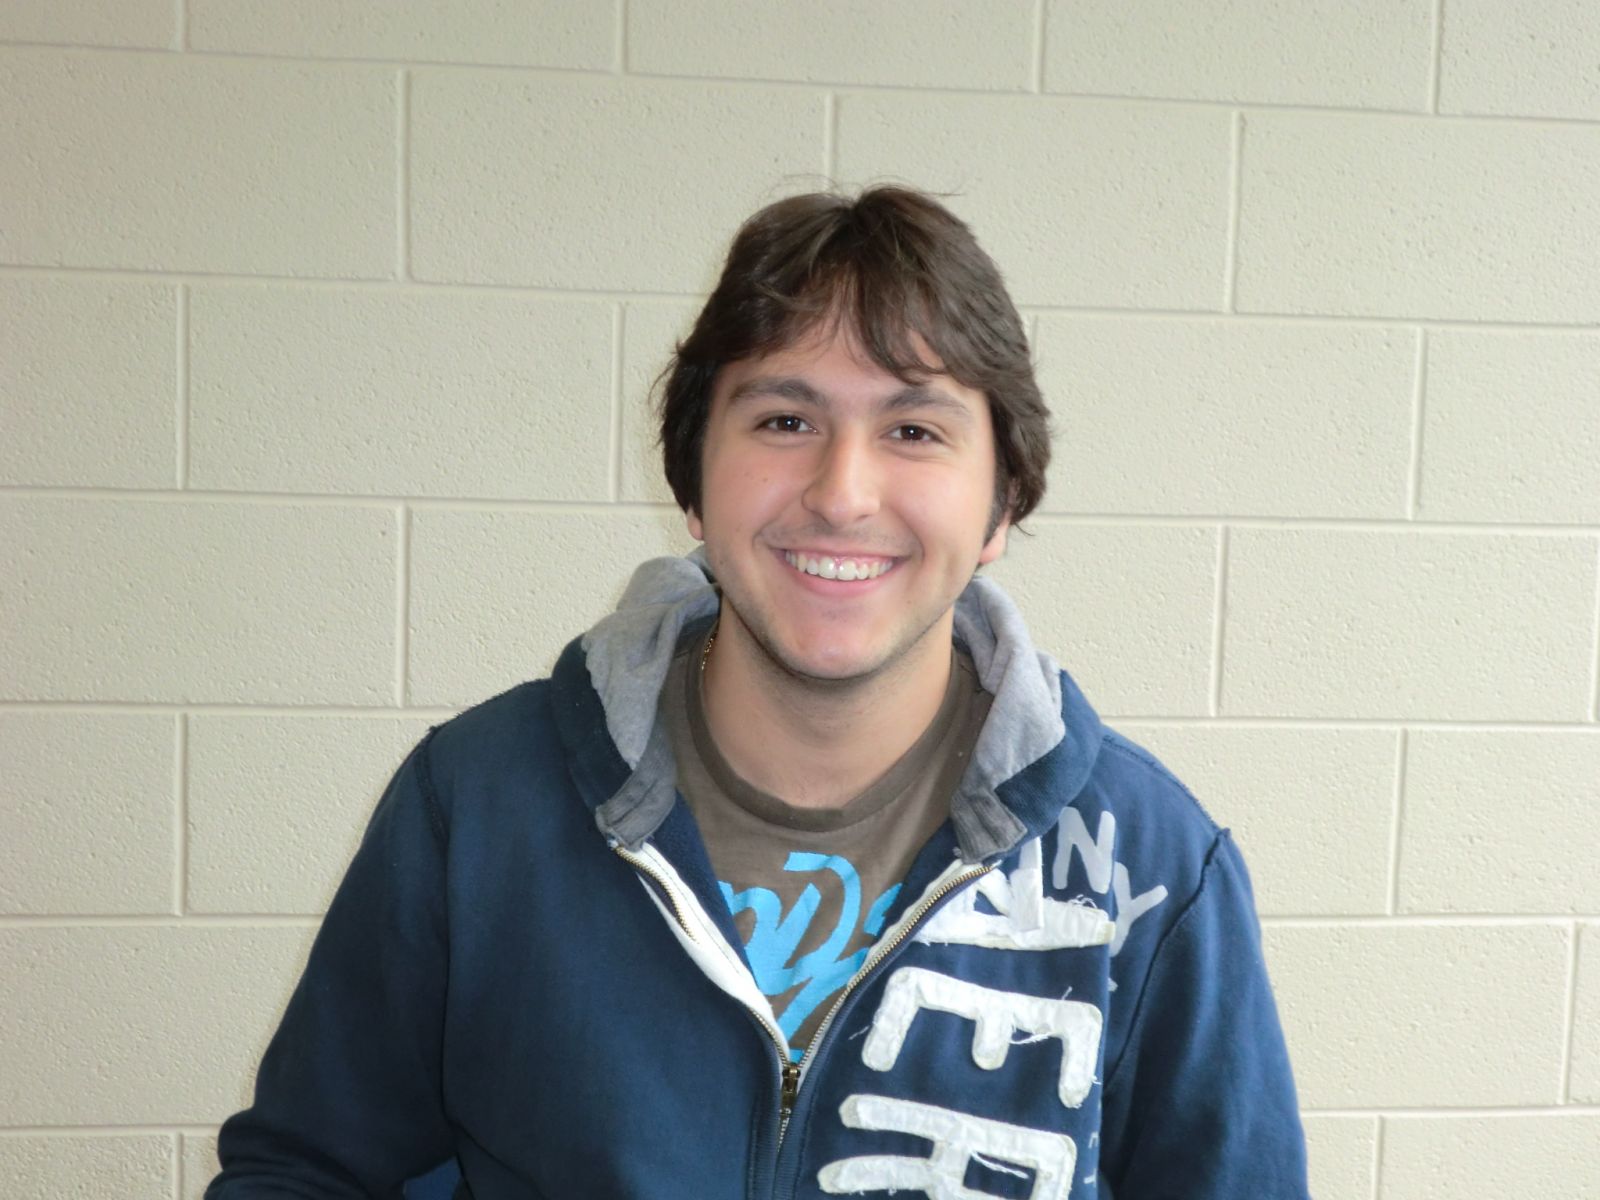 Student Anthony Piazza